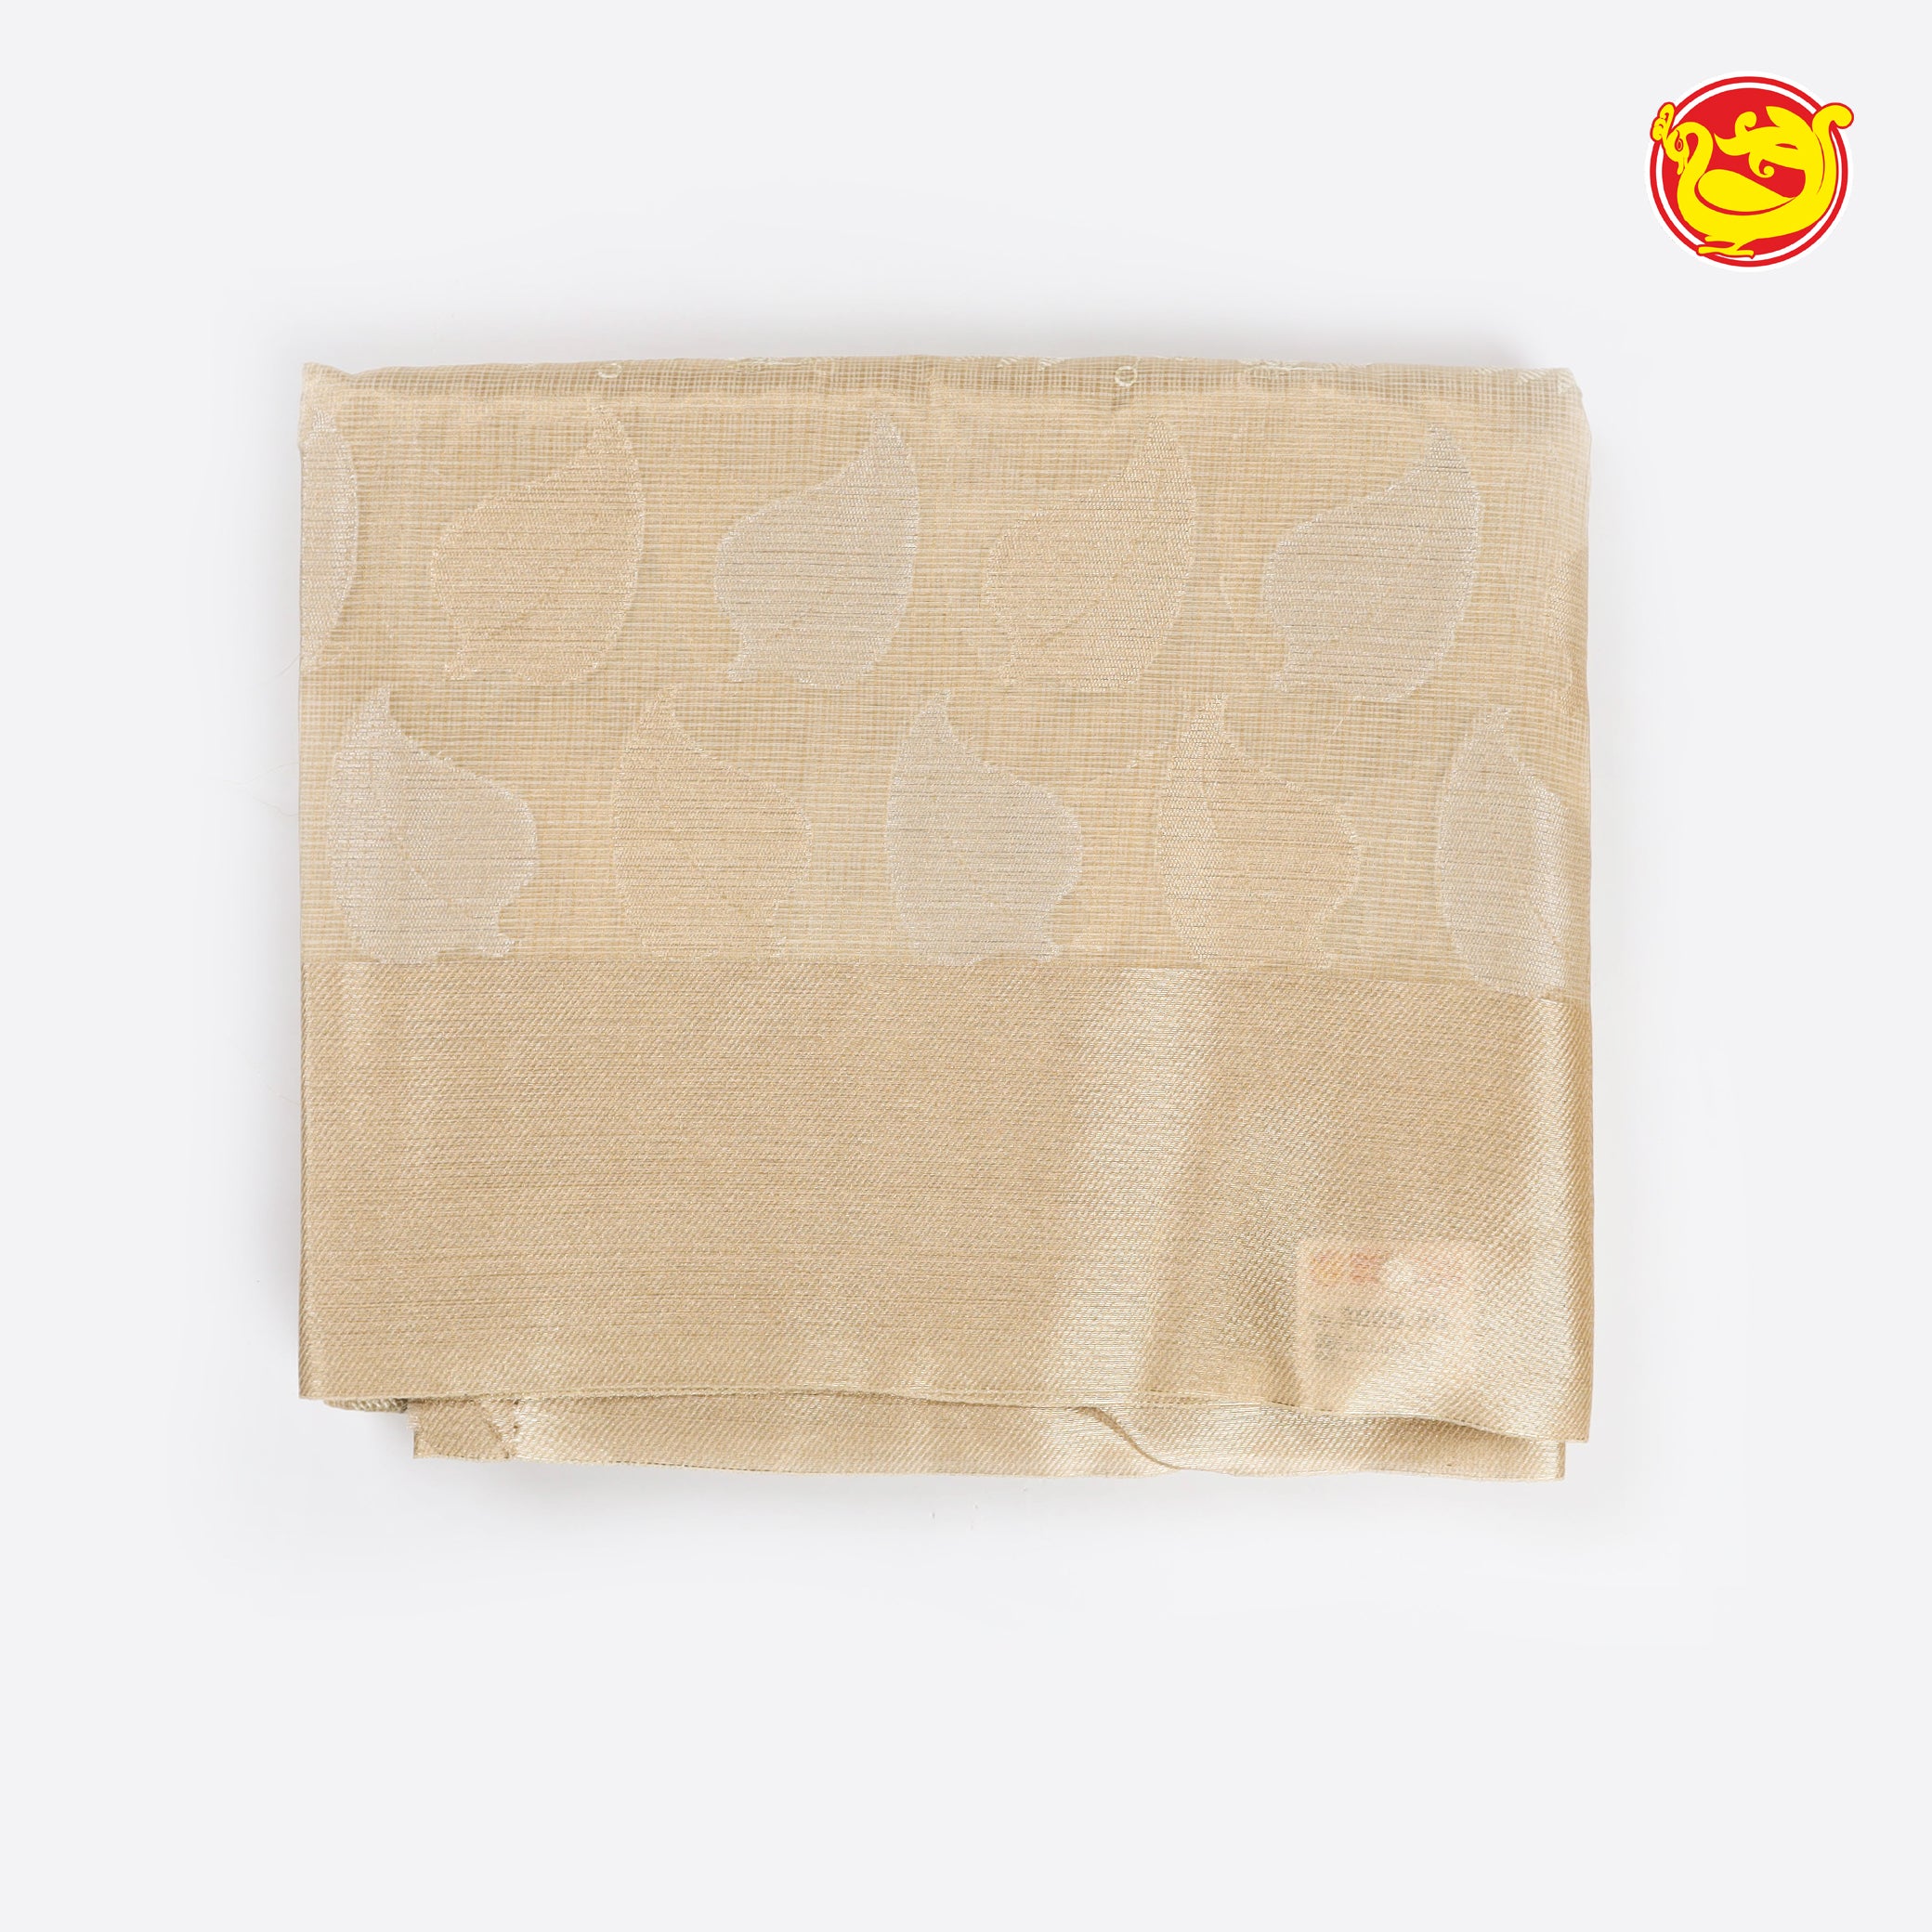 Fancy Tissue saree with woven leaves motif